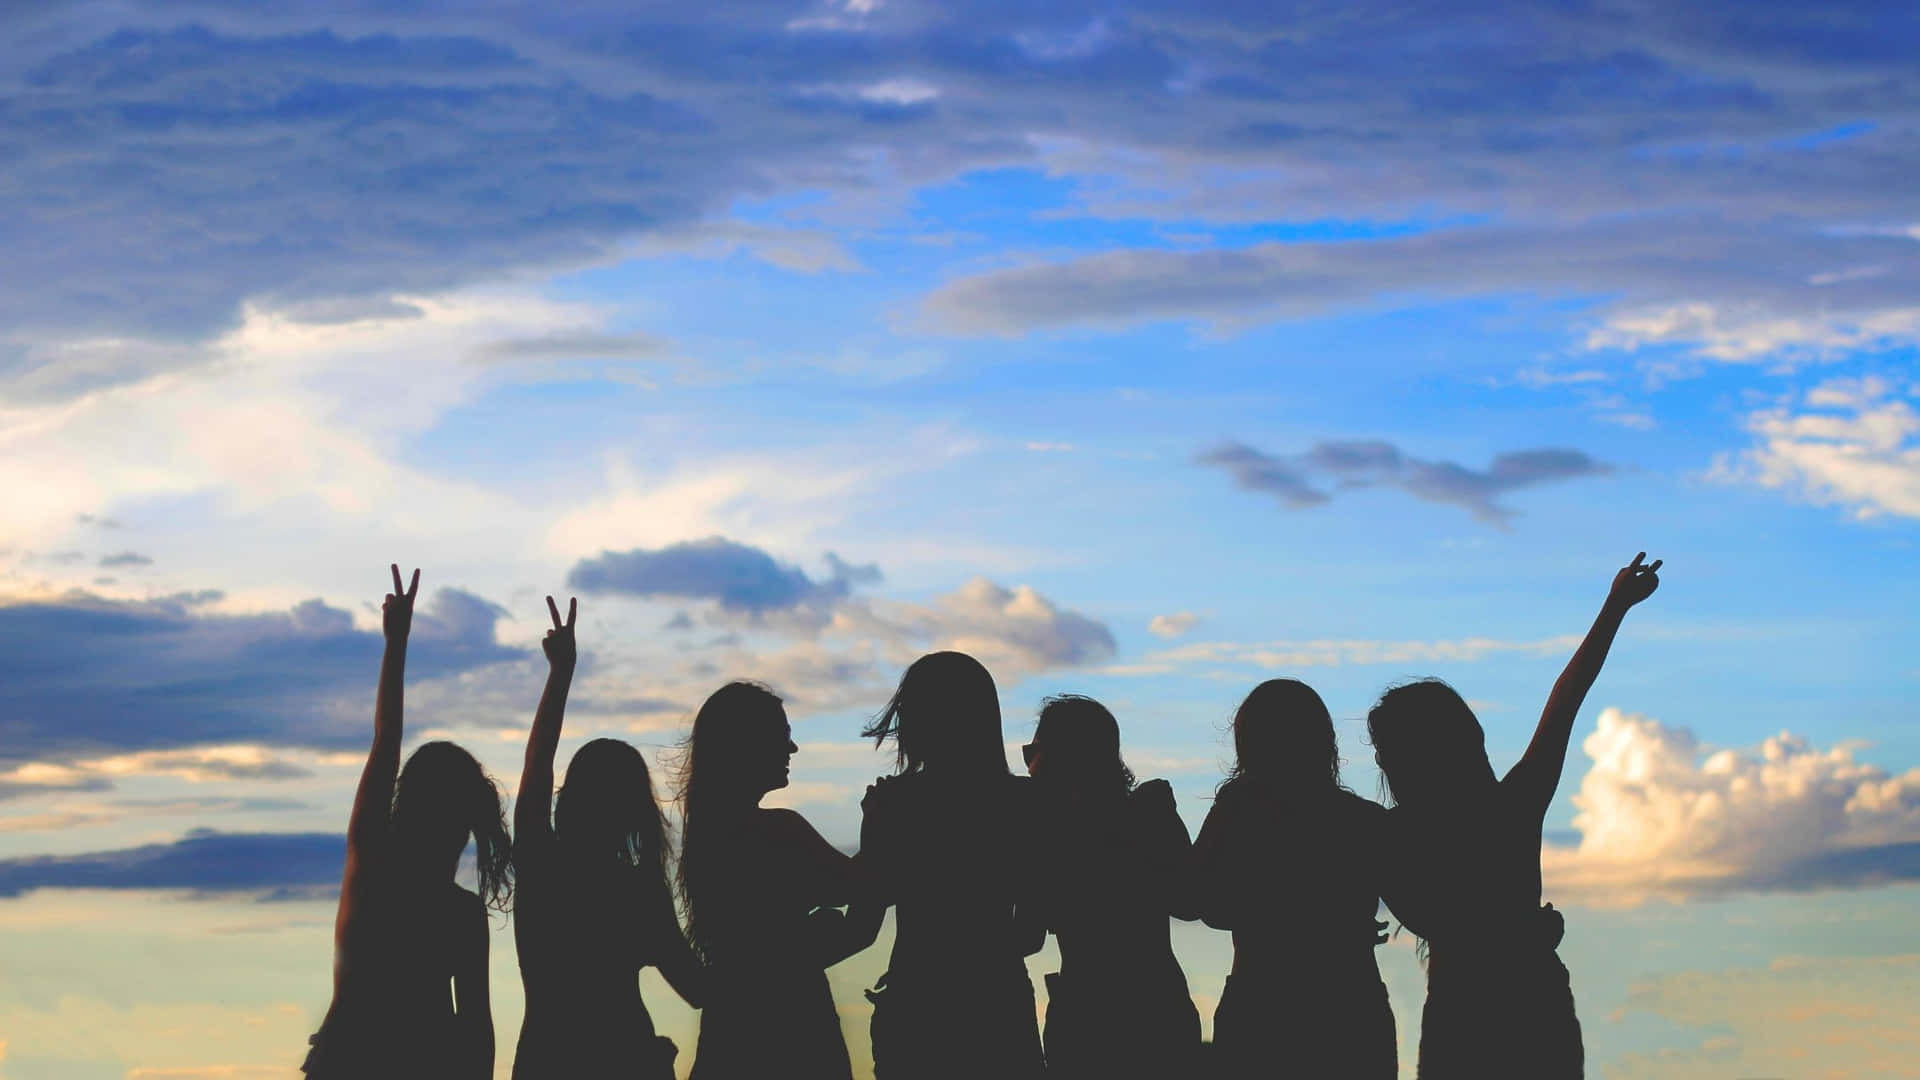 Silhouette Of A Group Of People With Their Hands Raised